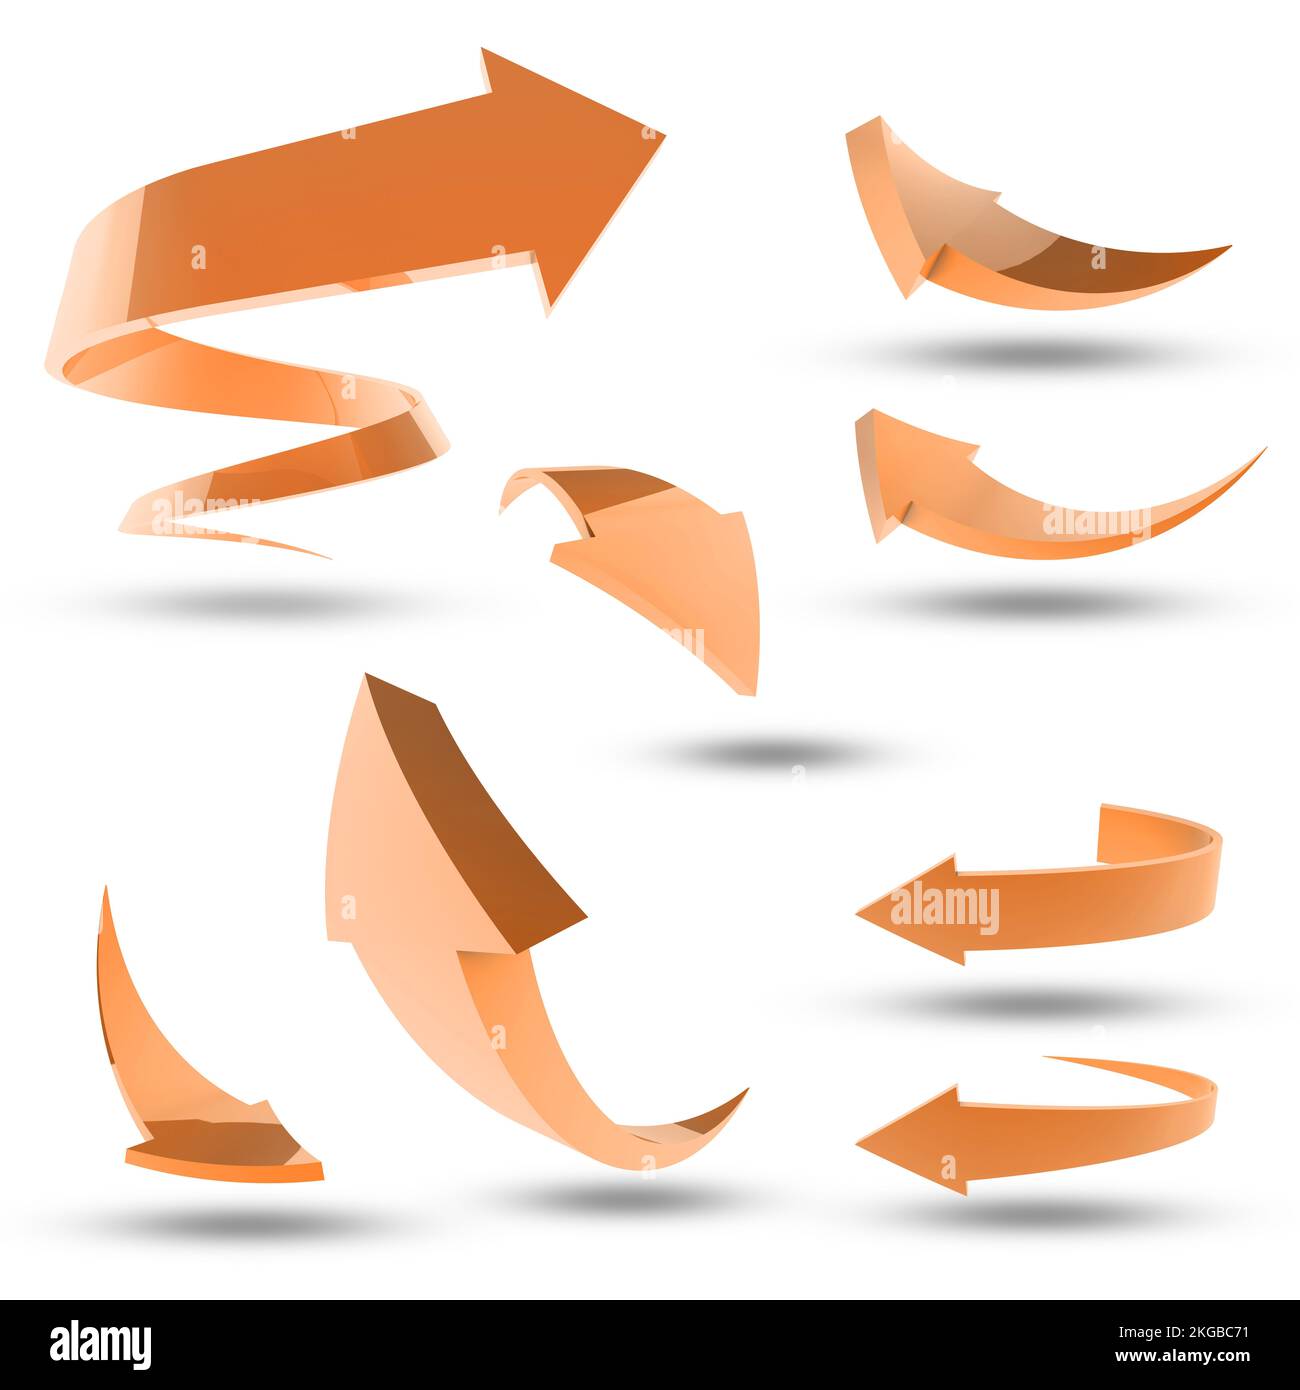 Orange directions. Computer graphic of a collection of arrows on a white background. Stock Photo